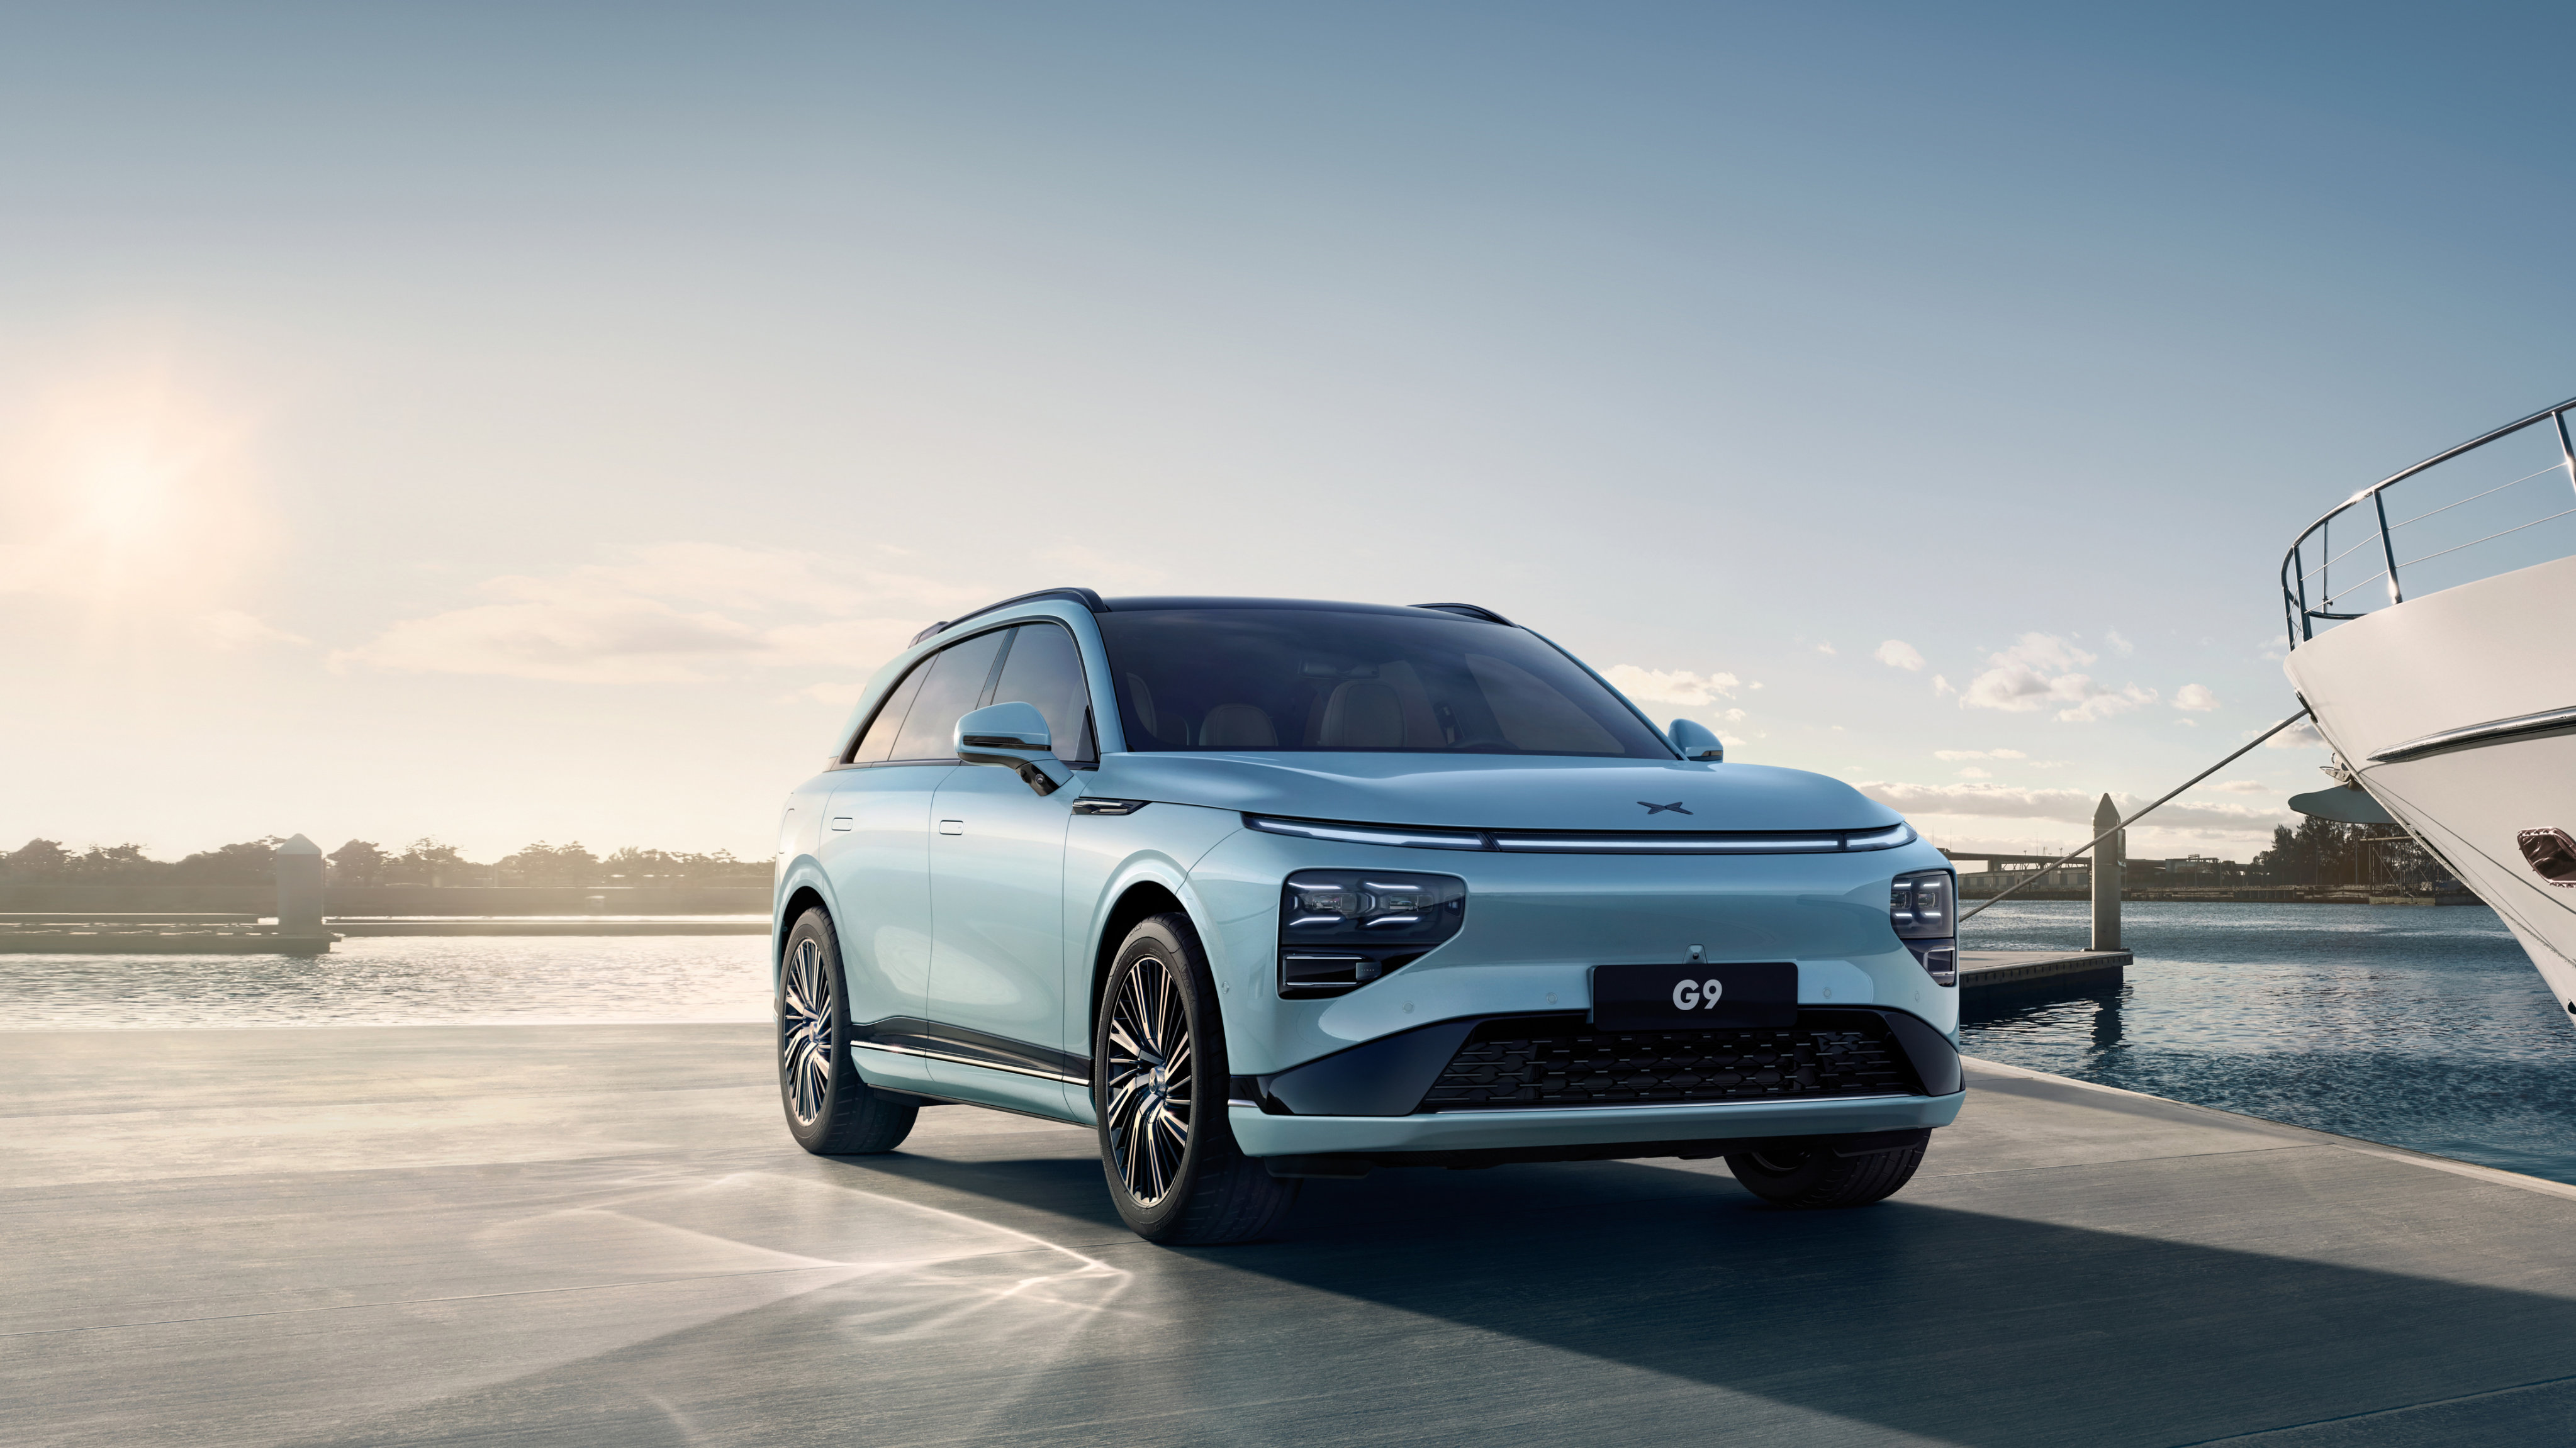 The G9, starting from US$49,740 in Norway, needs just five minutes of ultra-fast charging for a driving range of 300 kilometres, Xpeng claims. Photo: Xpeng